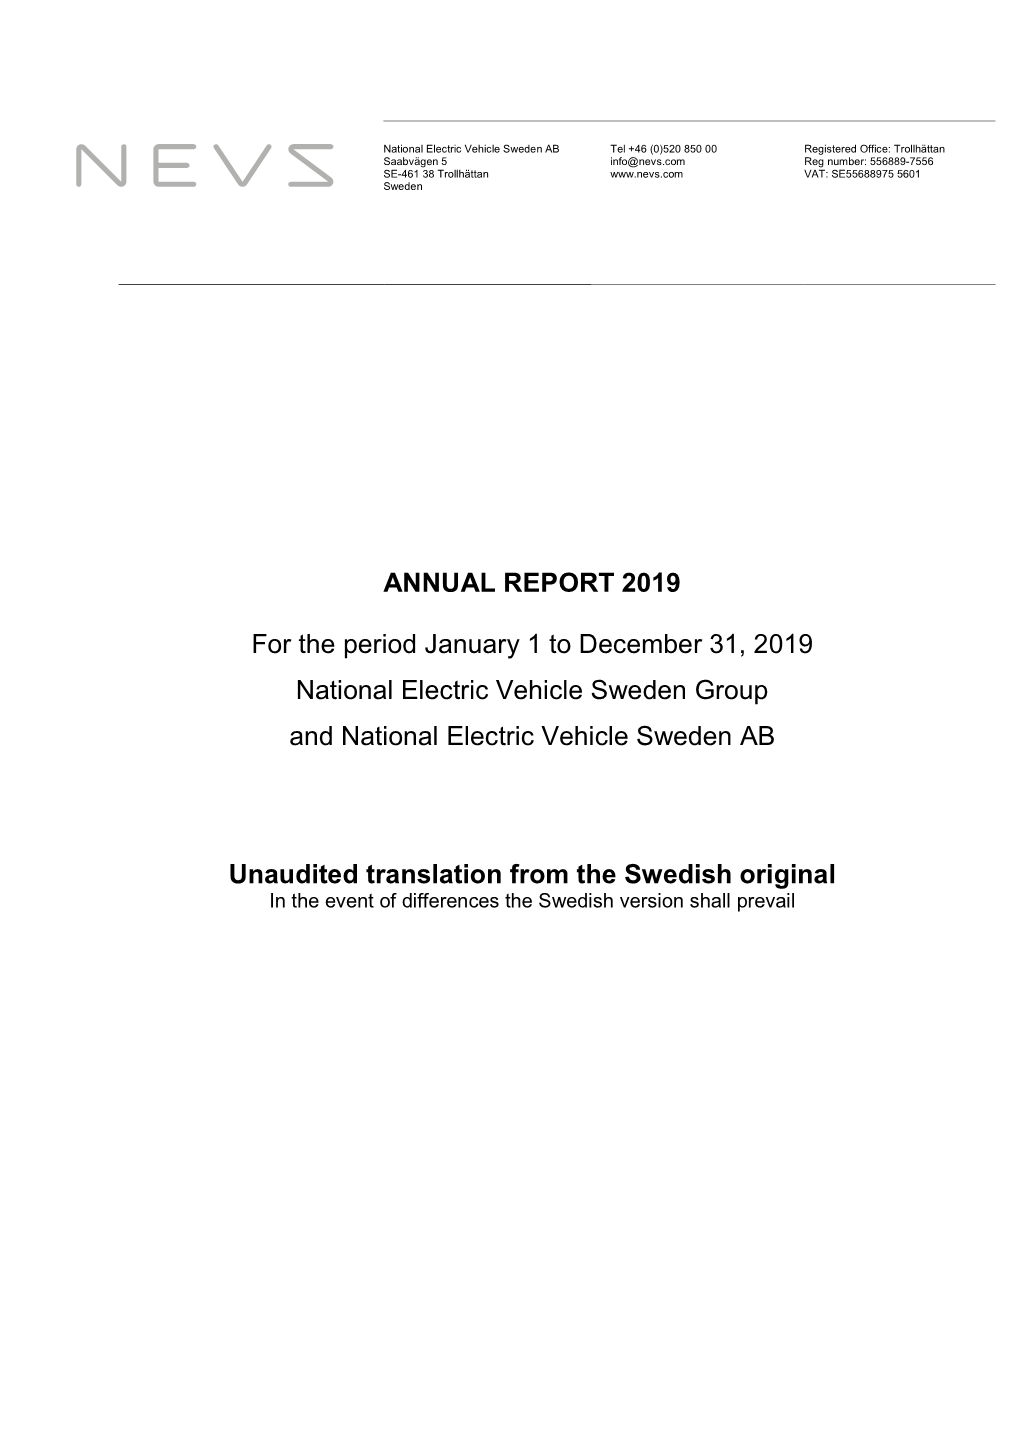 ANNUAL REPORT 2019 for the Period January 1 to December 31